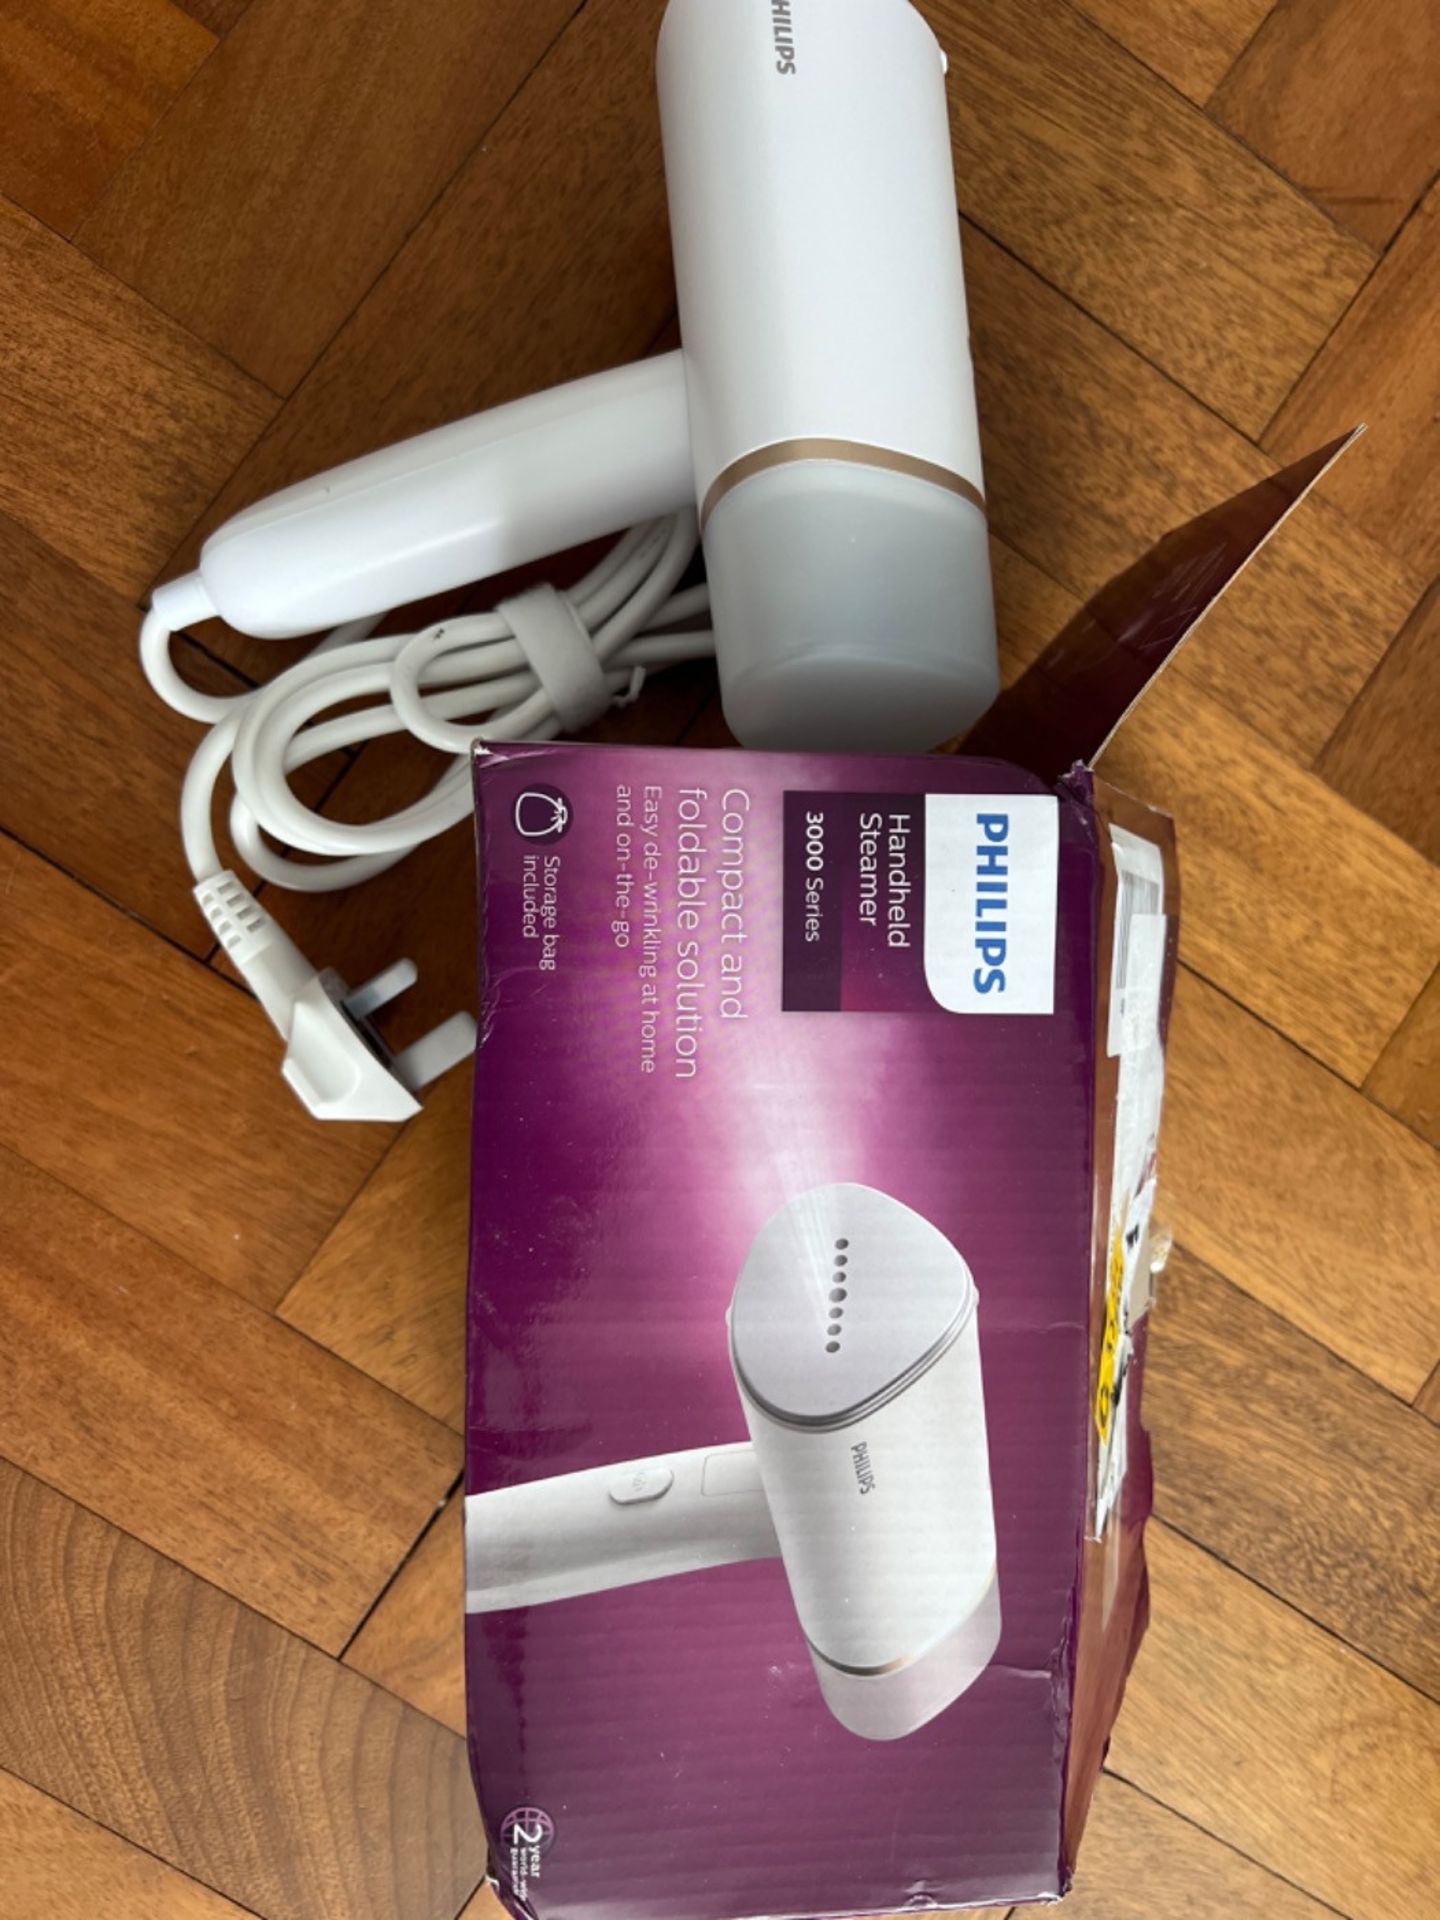 Philips Handheld Steamer 3000 Series, Compact and Foldable, Ready to Use in ˜30 Seconds, No Ironin - Image 2 of 2